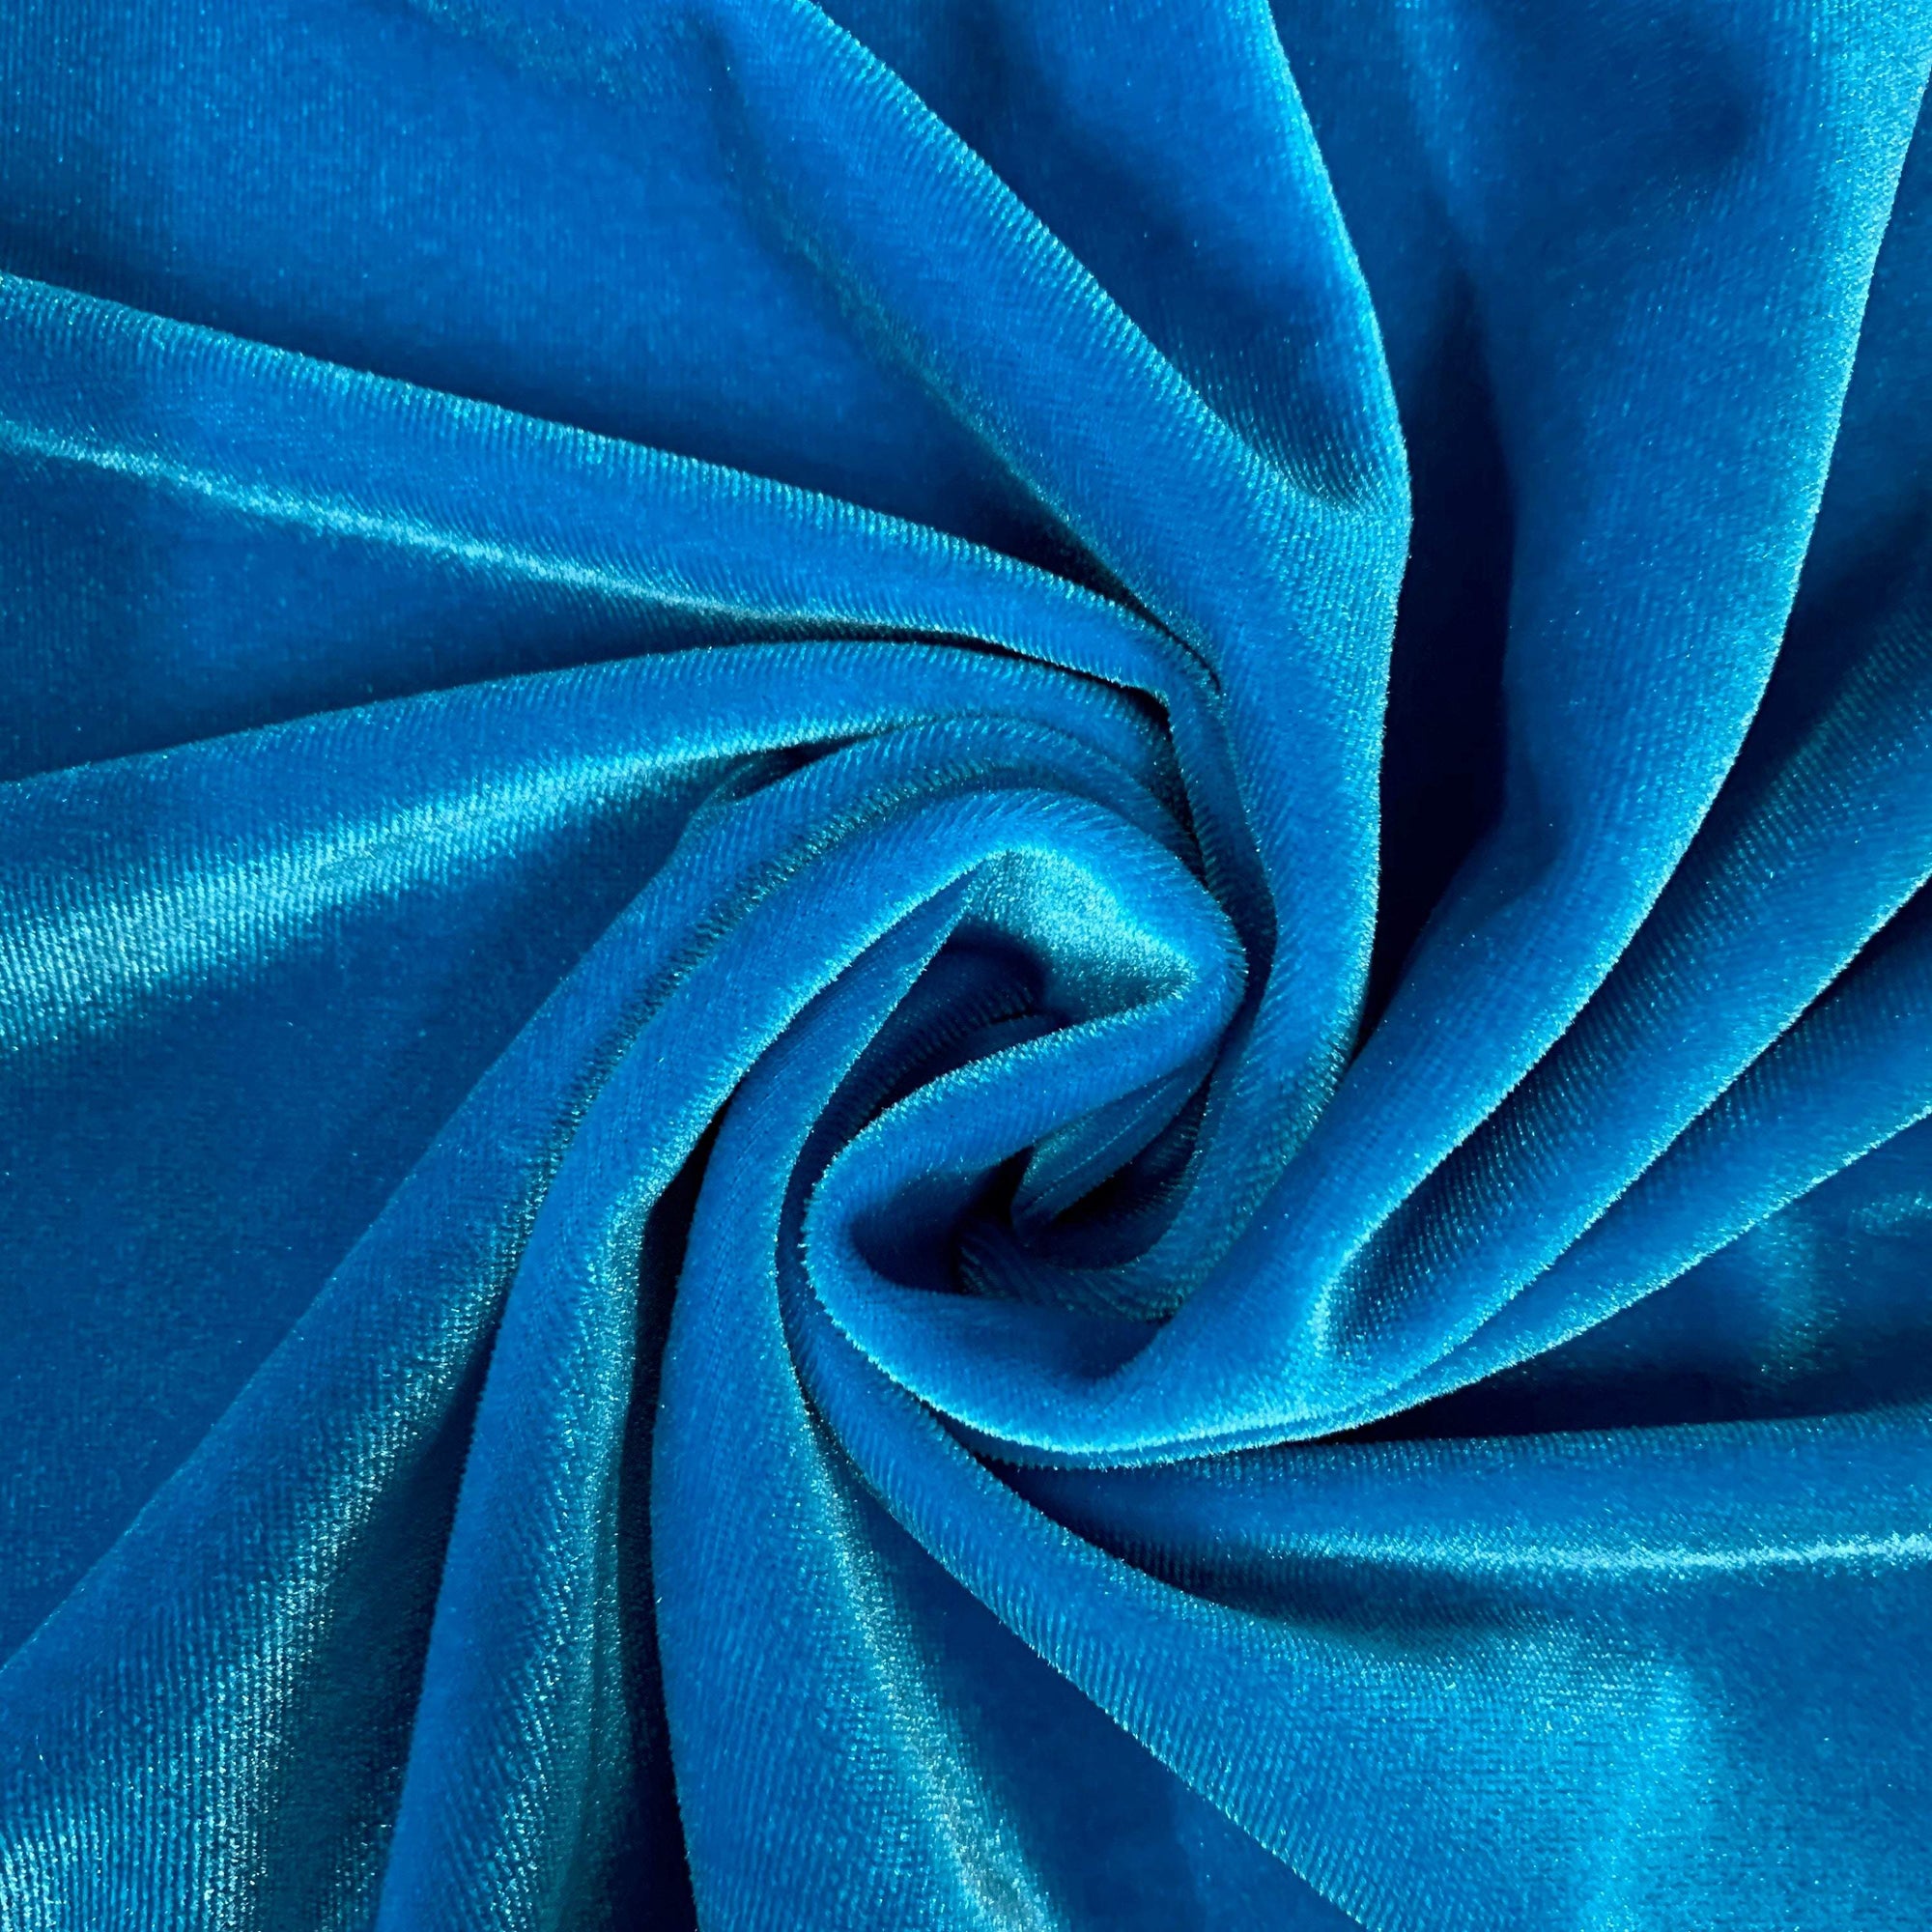 Princess TURQUOISE BLUE Polyester Stretch Velvet Fabric by the Yard for Tops, Dresses, Skirts, Dance Wear, Costumes, Crafts - 10001